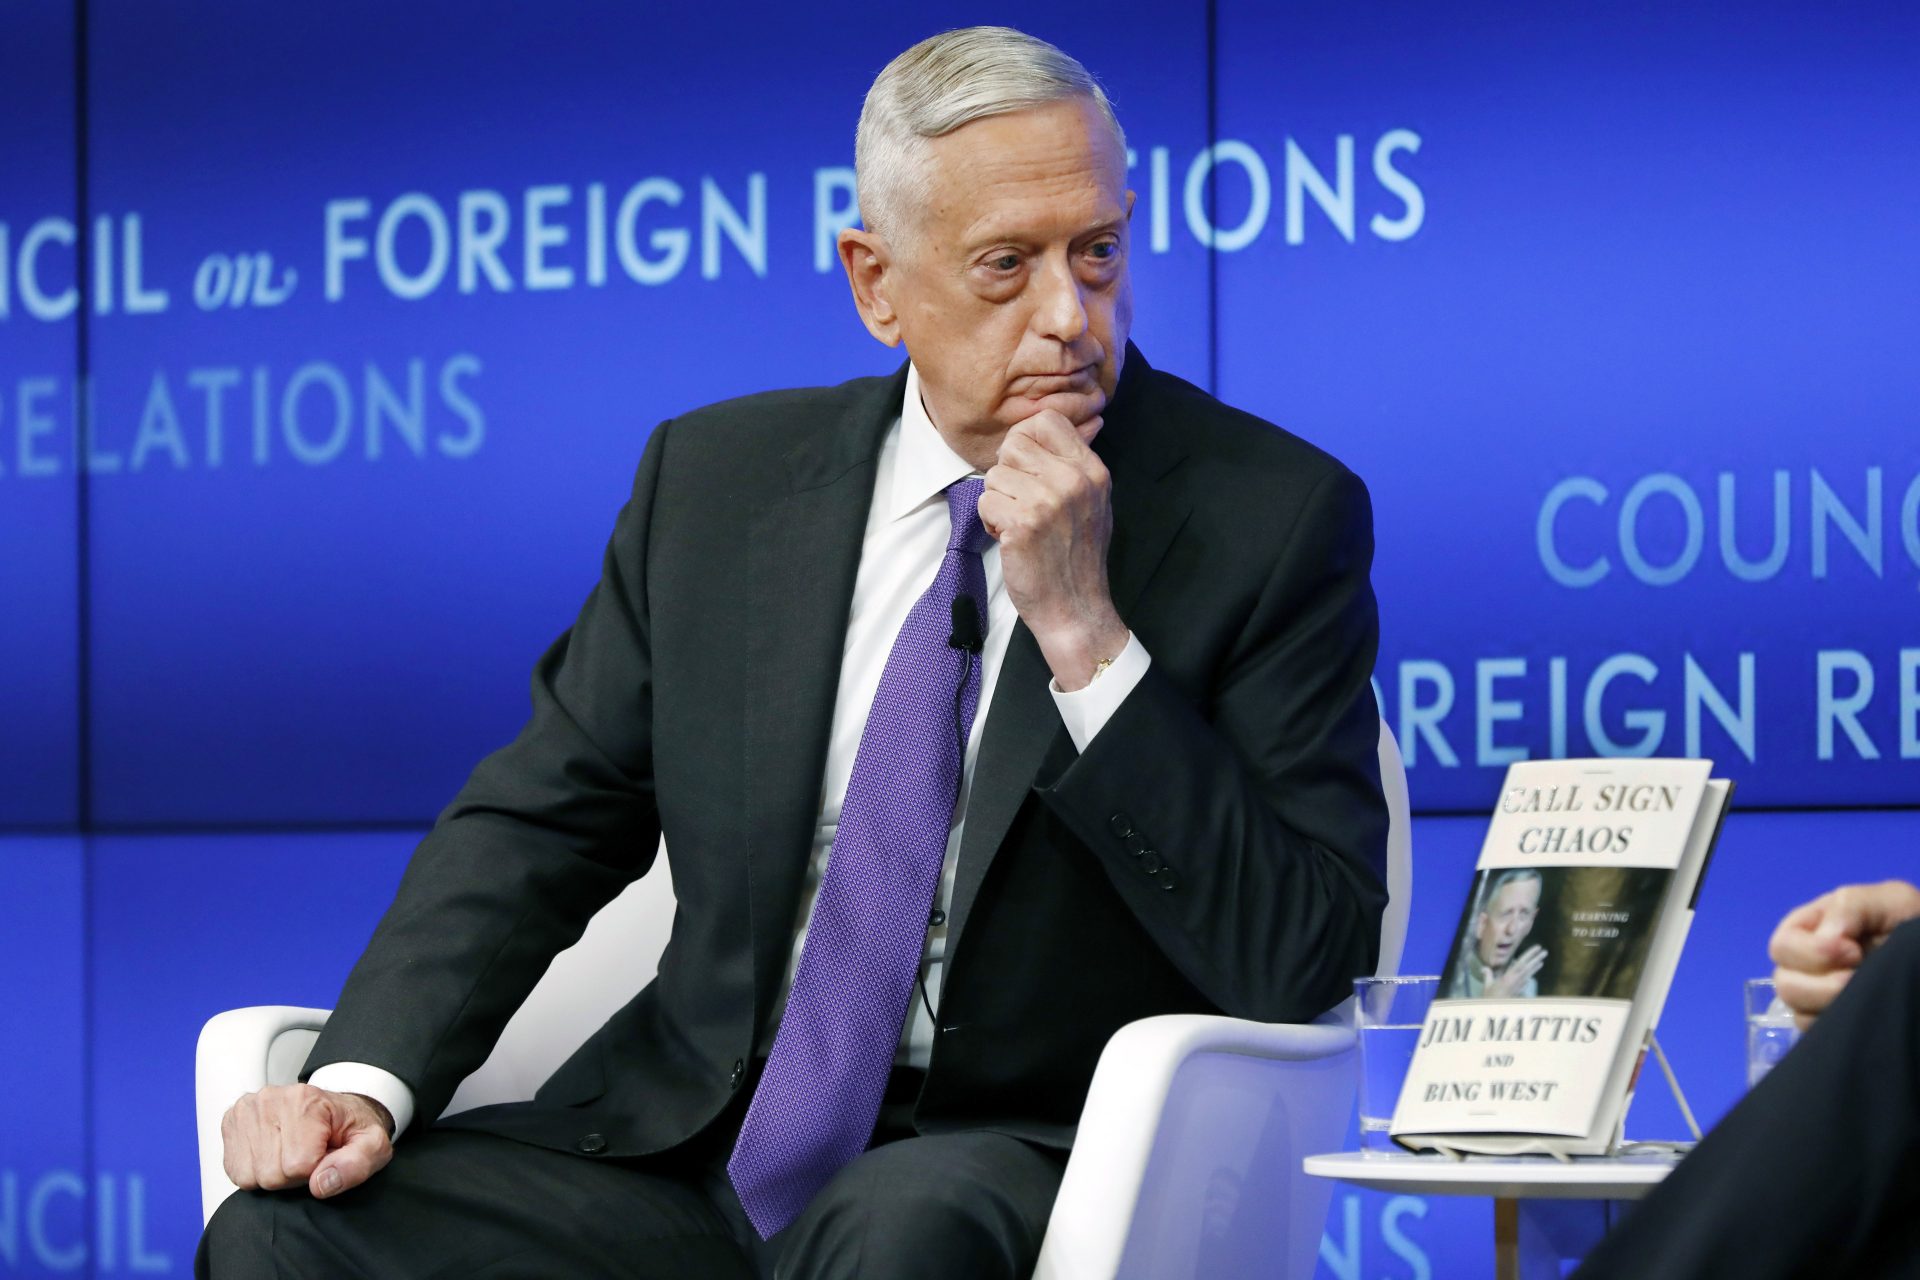 Former U.S. Secretary of Defense Jim Mattis listens to a question during his appearance at the Council on Foreign Relations, in New York, Tuesday, Sept. 3, 2019.